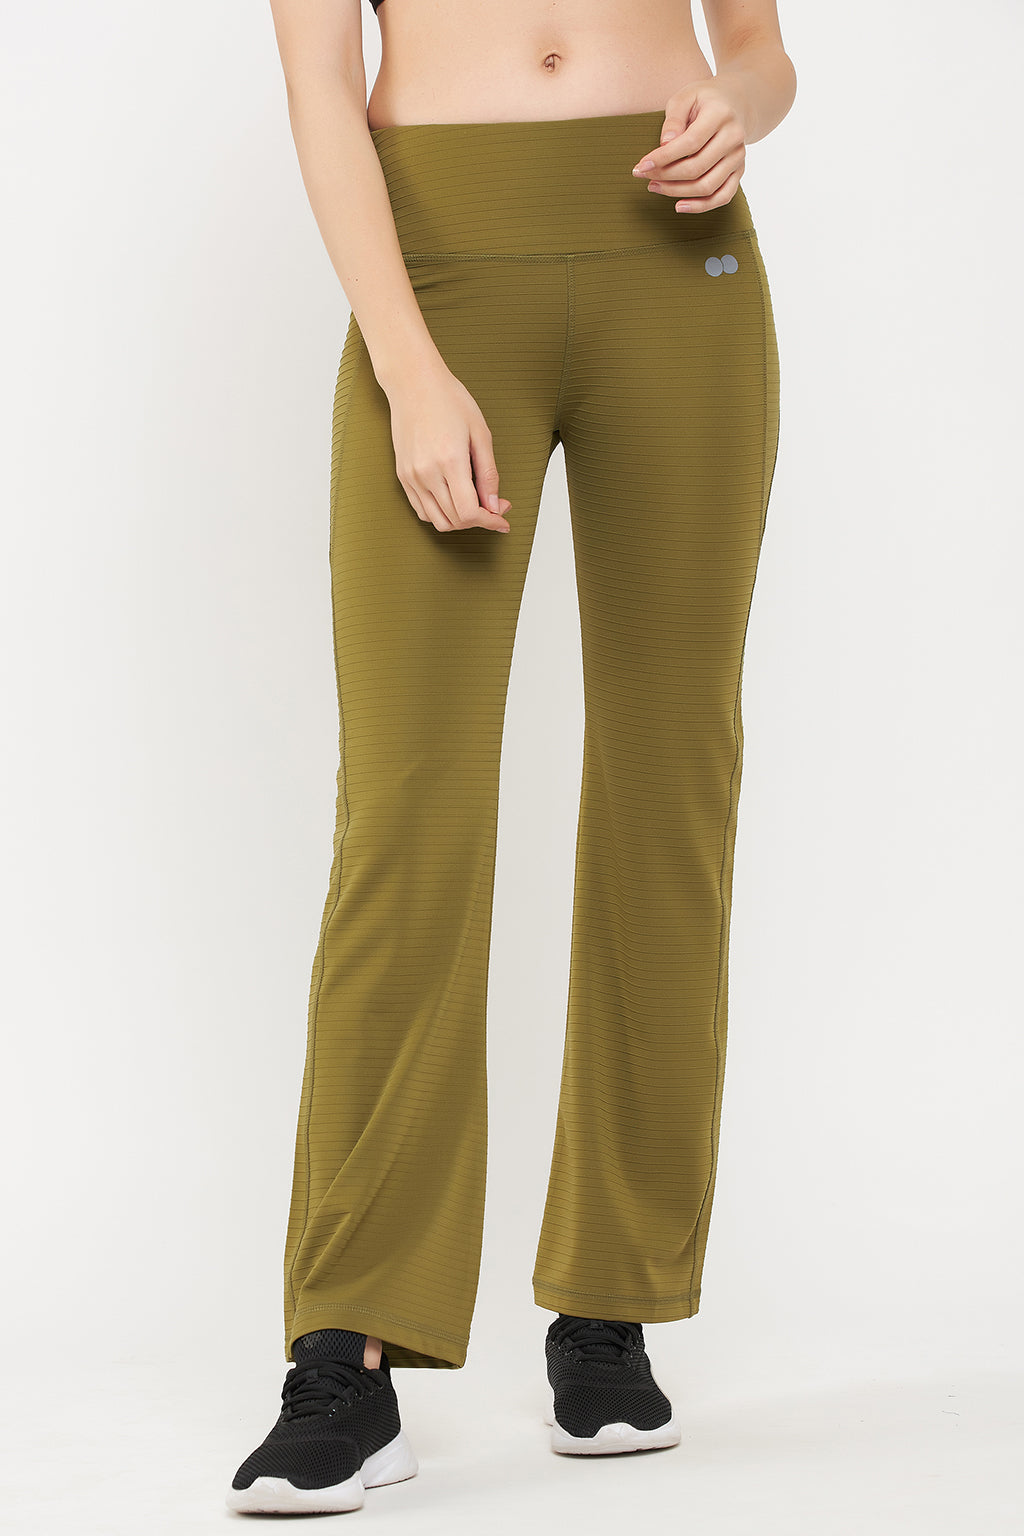 Olive Green High-Waist Flared Yoga Pants with Side Pockets